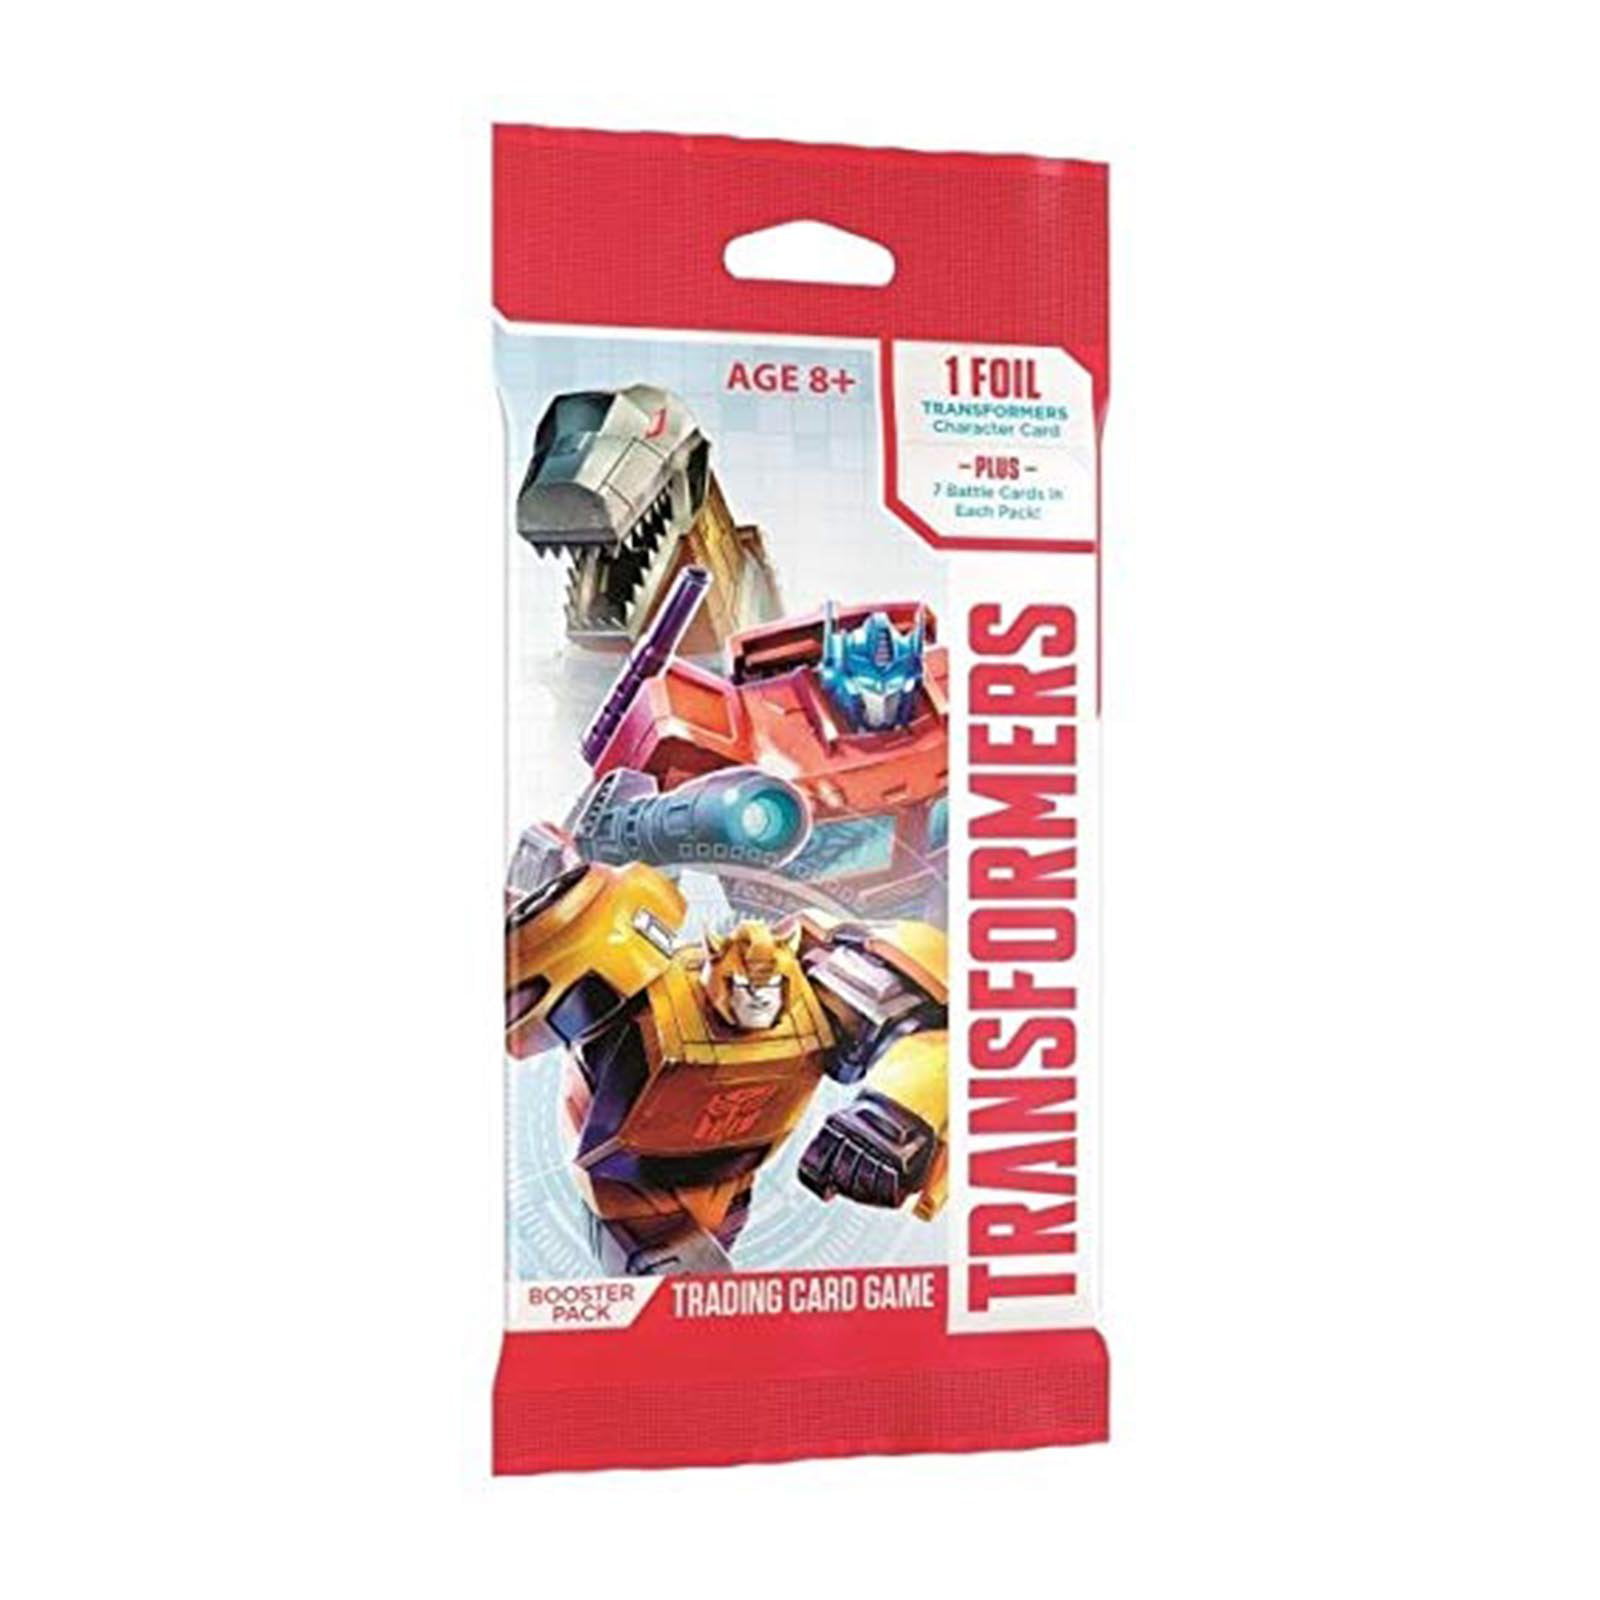 Transformers TCG Wave 1 Booster Box NEW SEALED IN STOCK 